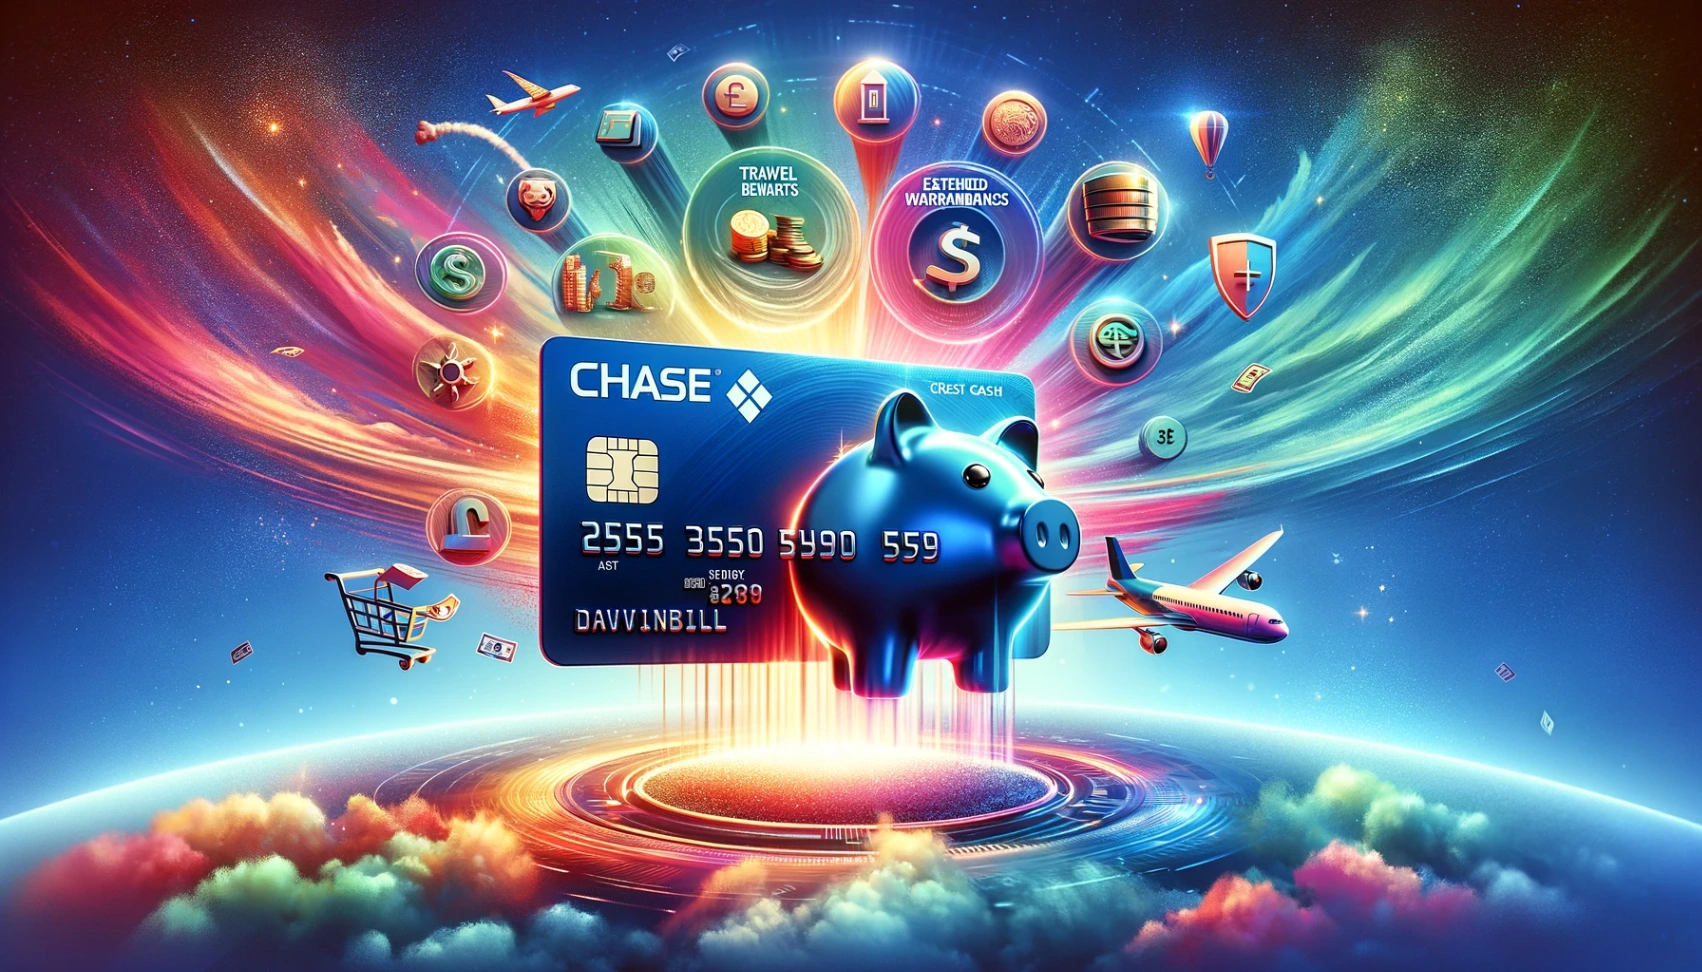 Chase Credit Card - Learn How to Apply Online